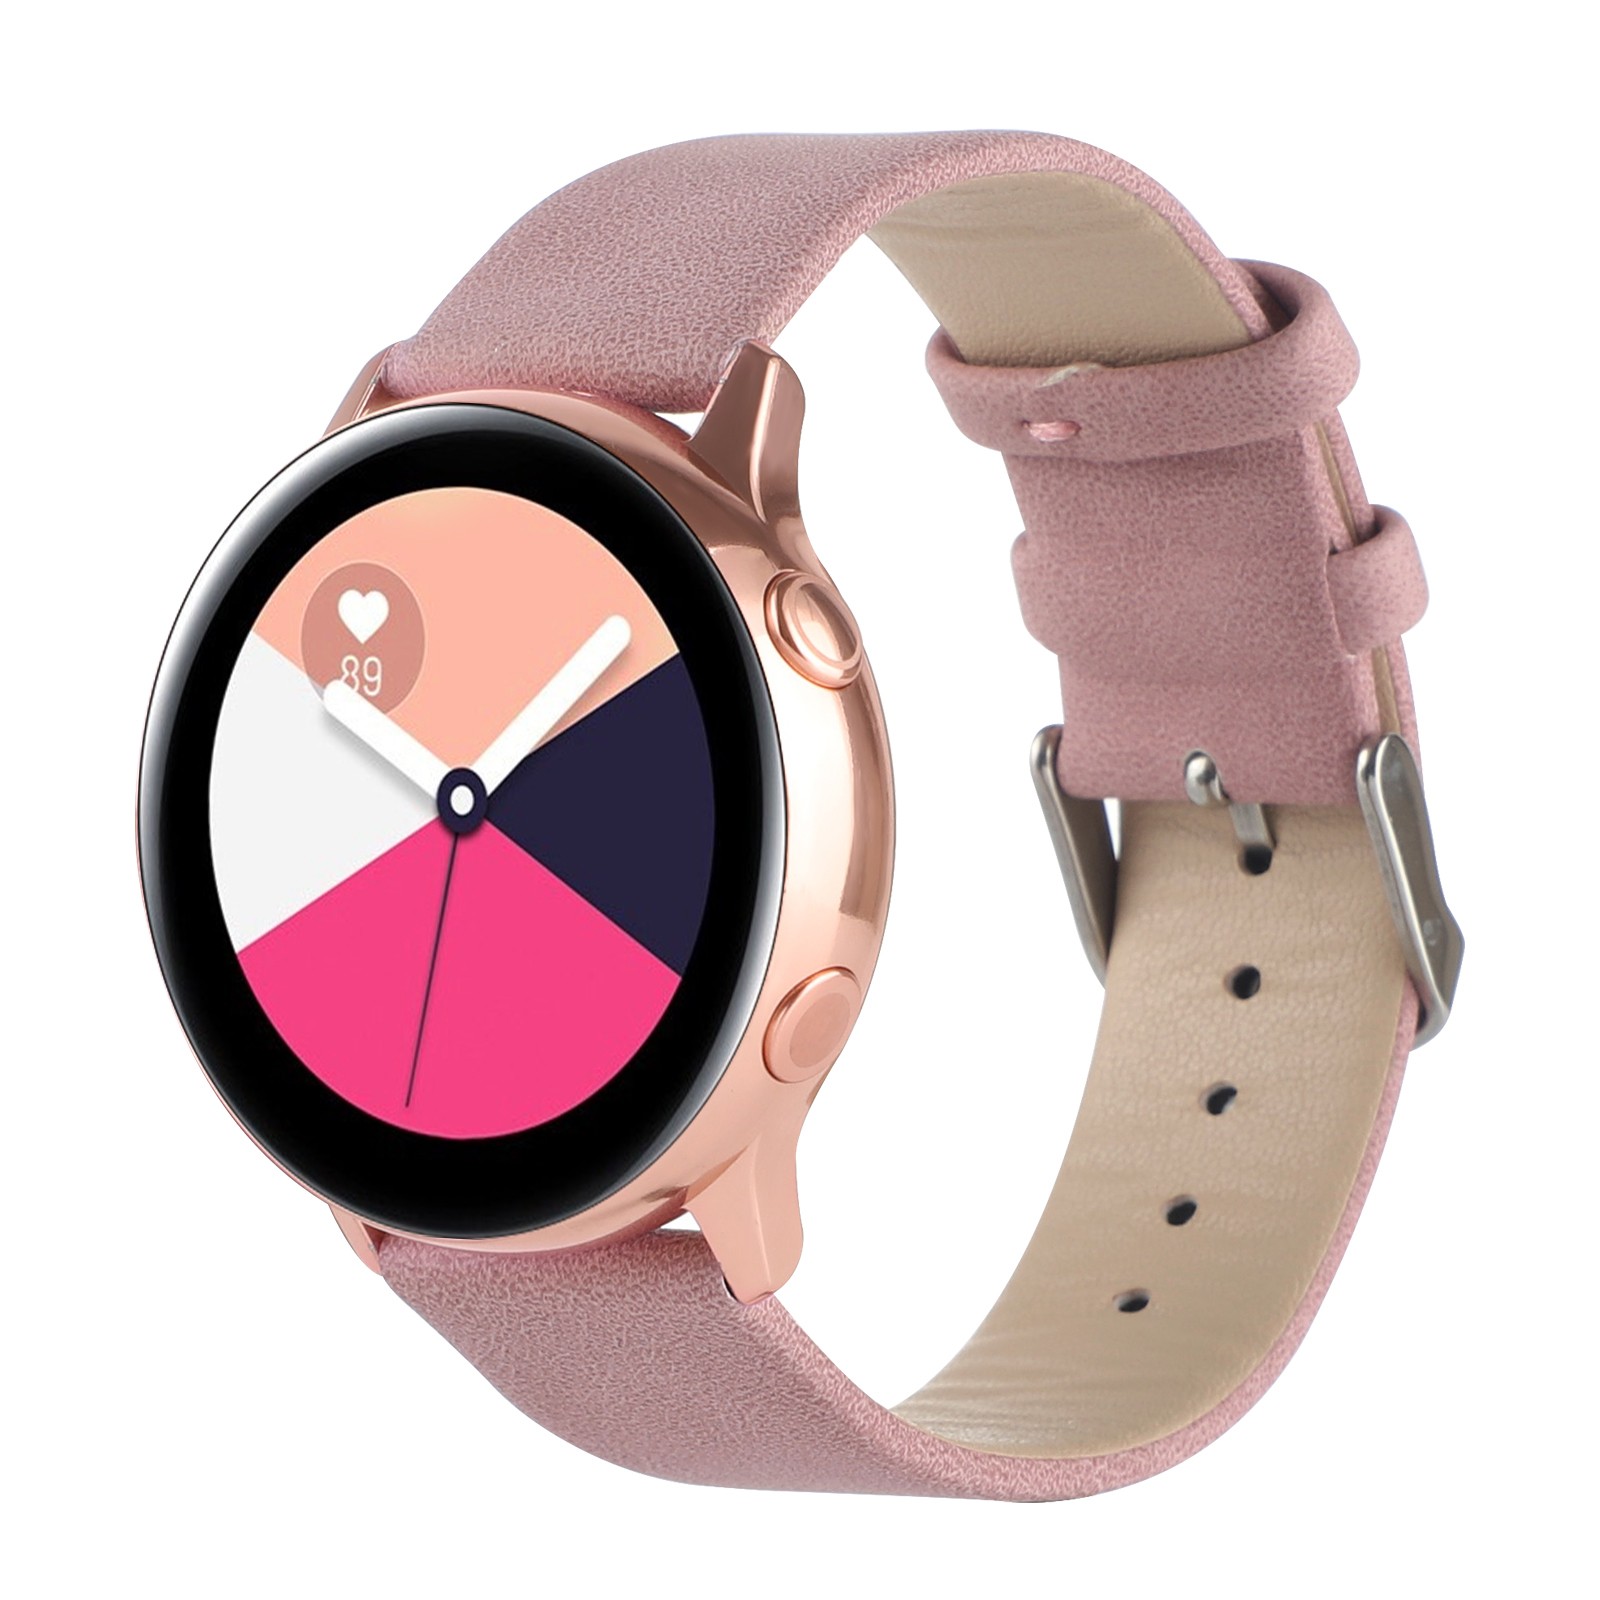 20mm Leather Strap For Huawei Watch GT GT2 For Galaxy Watch 3 Galaxy Watch Activity 2 Amazfit GTR Amazfit Bip Replacement Strap